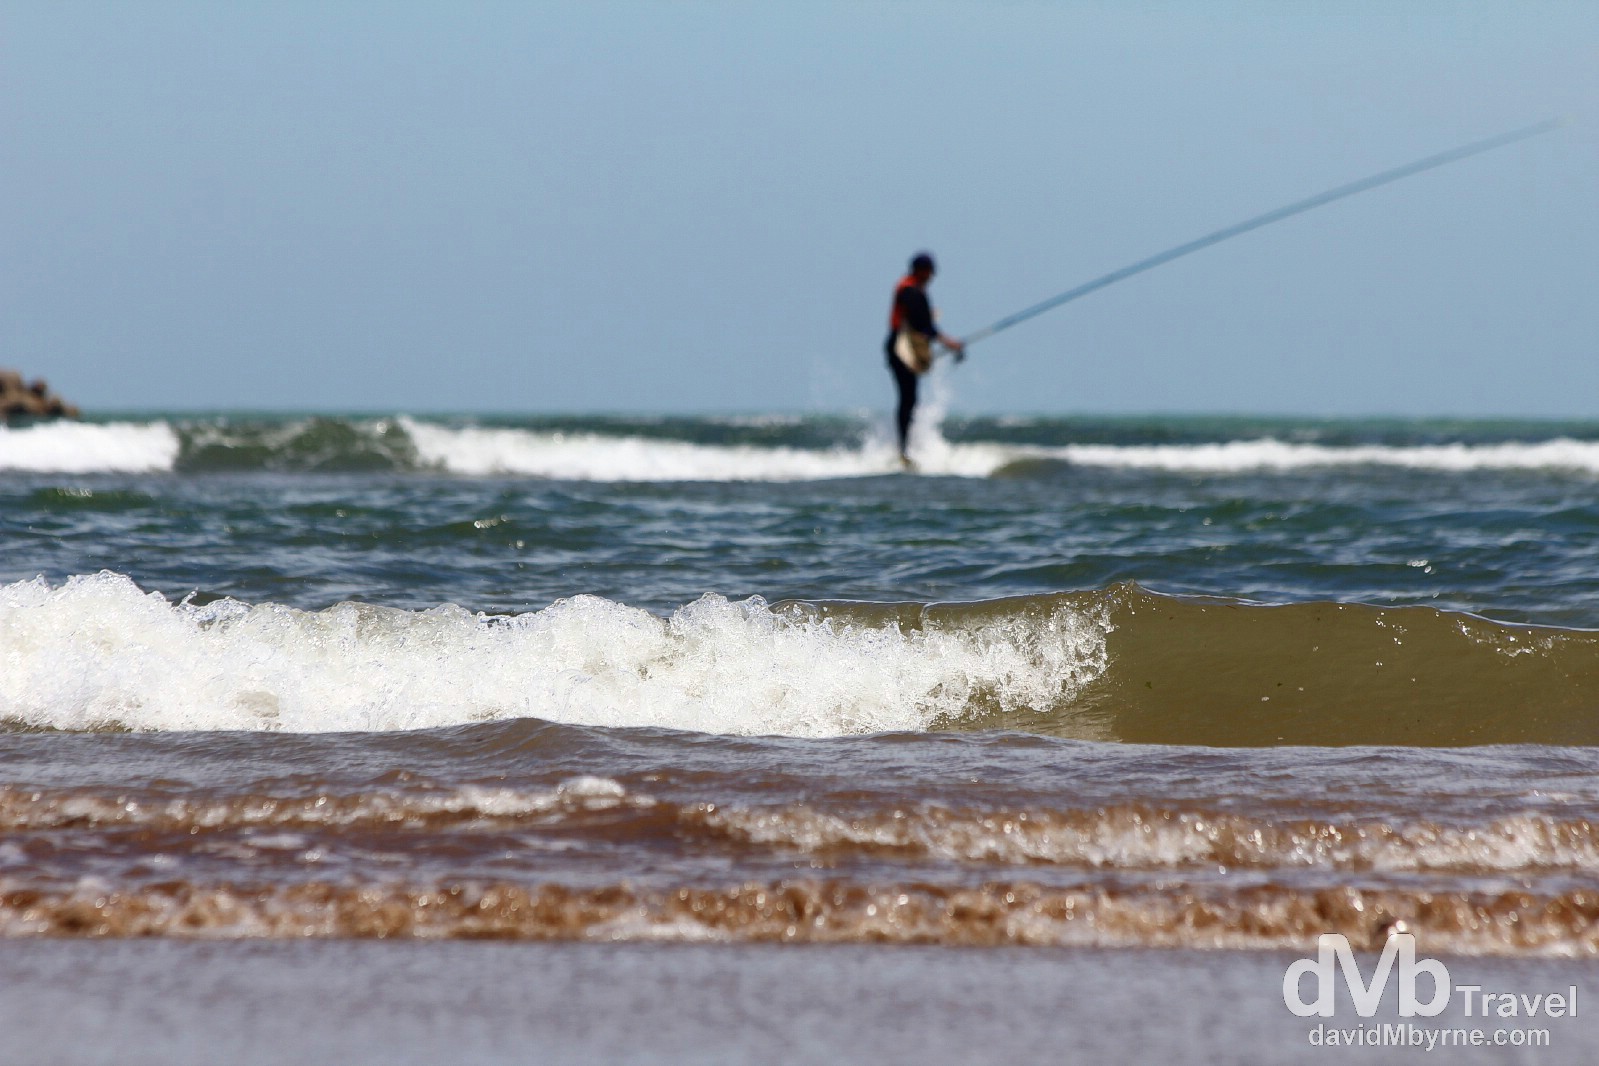 Fishing offshore of the beach in El Jadida, Morocco. May 1st, 2014.